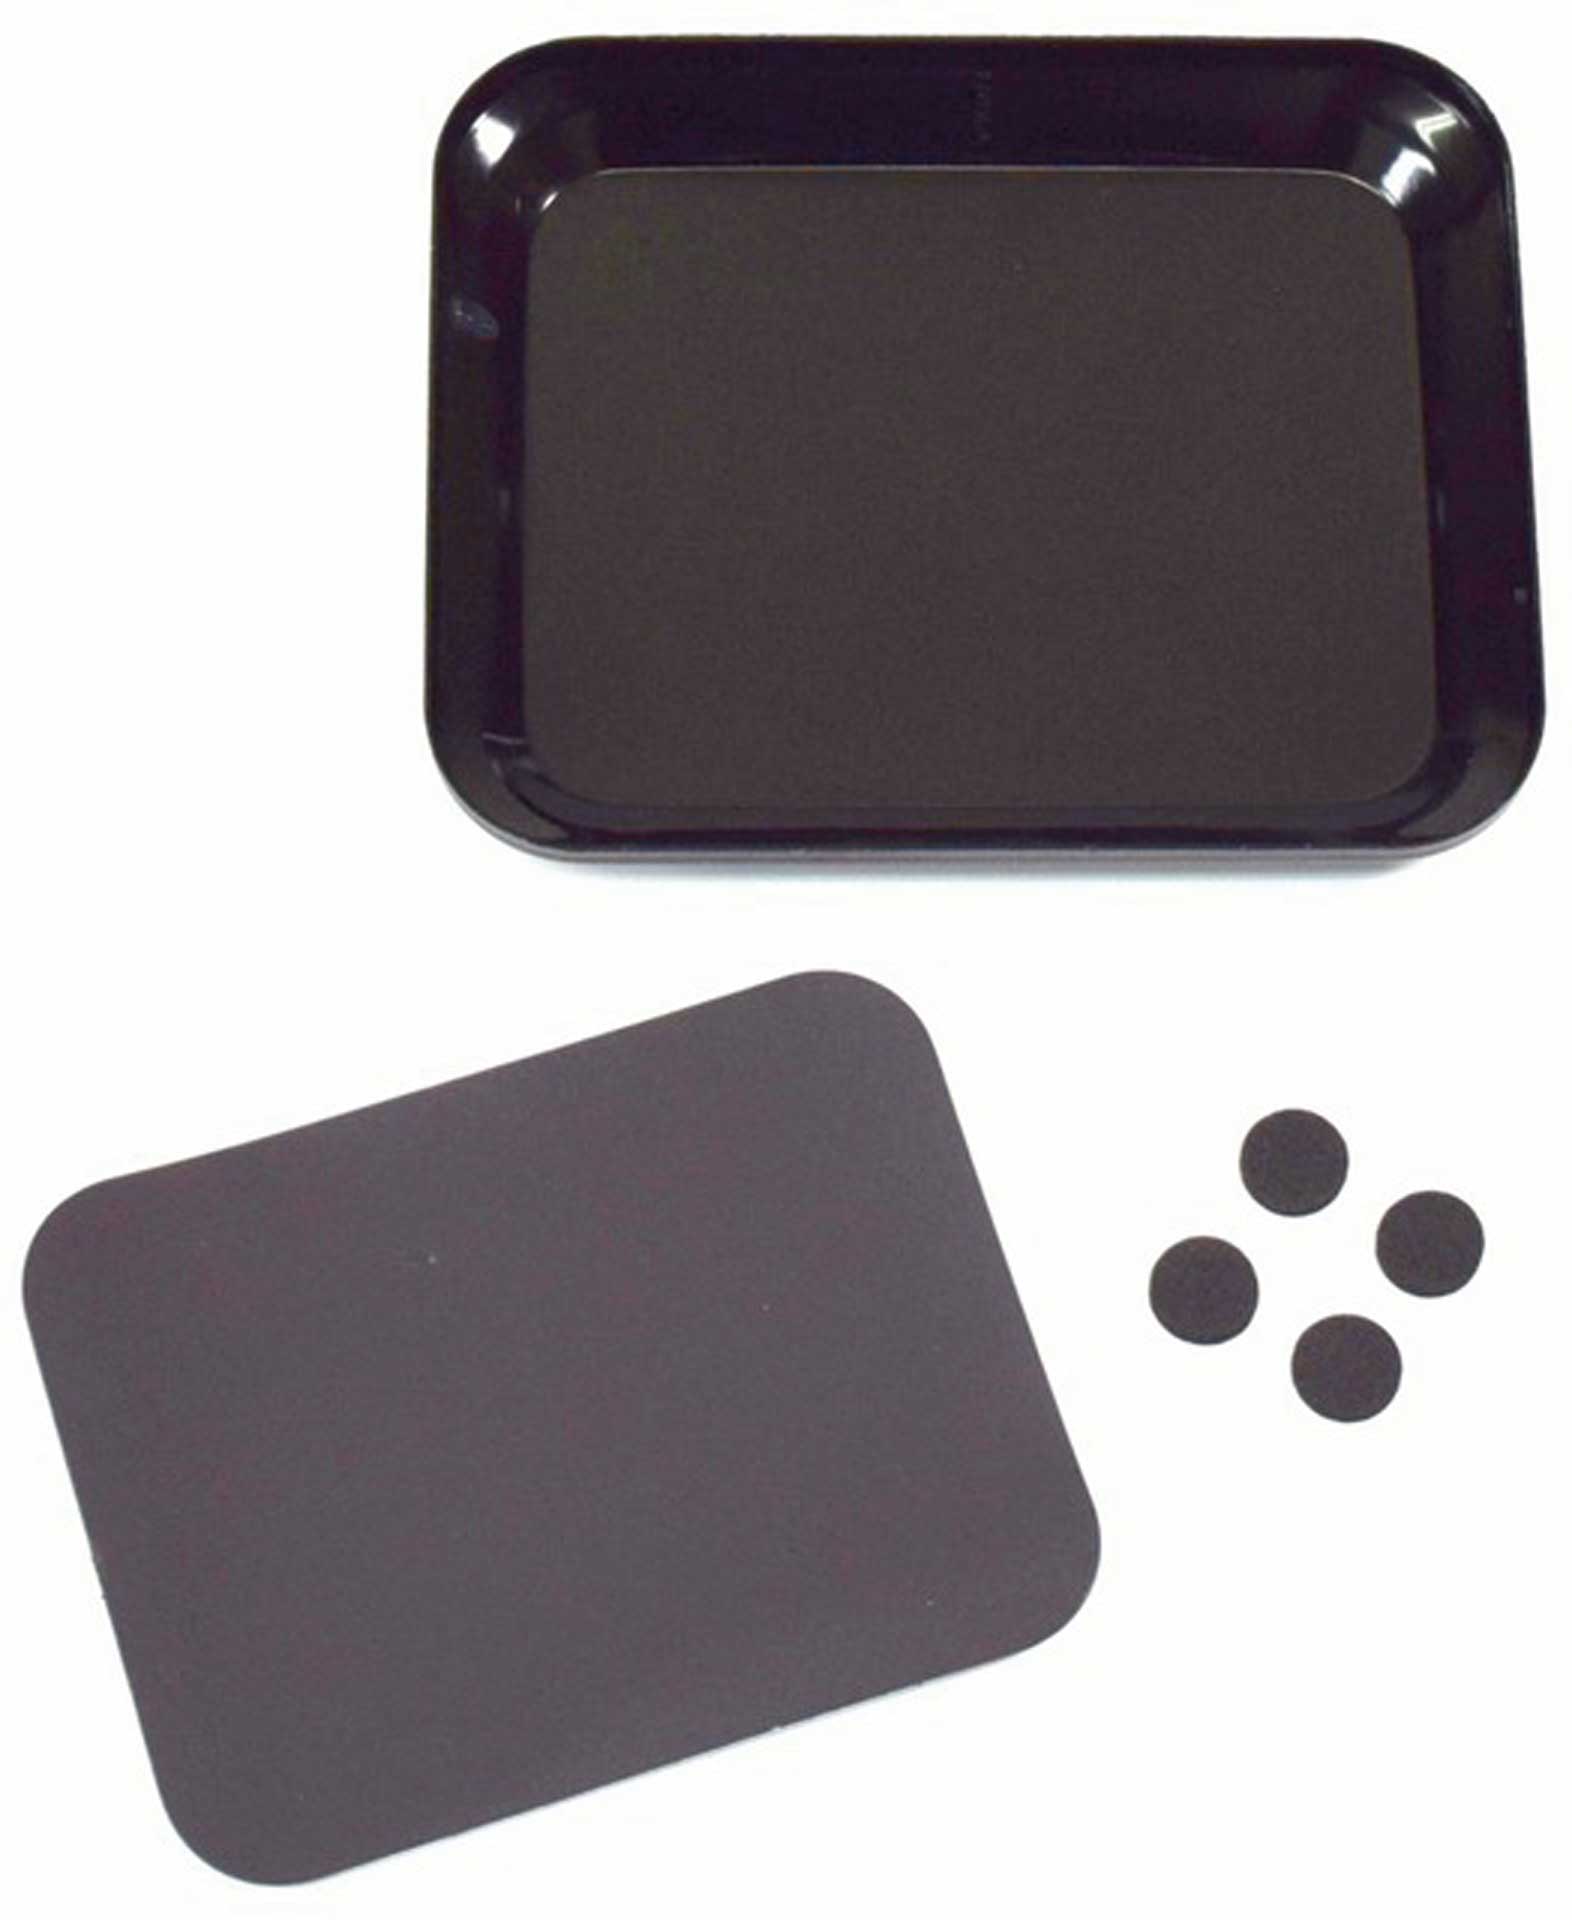 ABSIMA Aluminum tray with magnetic plate black (magnetic shell) for screws